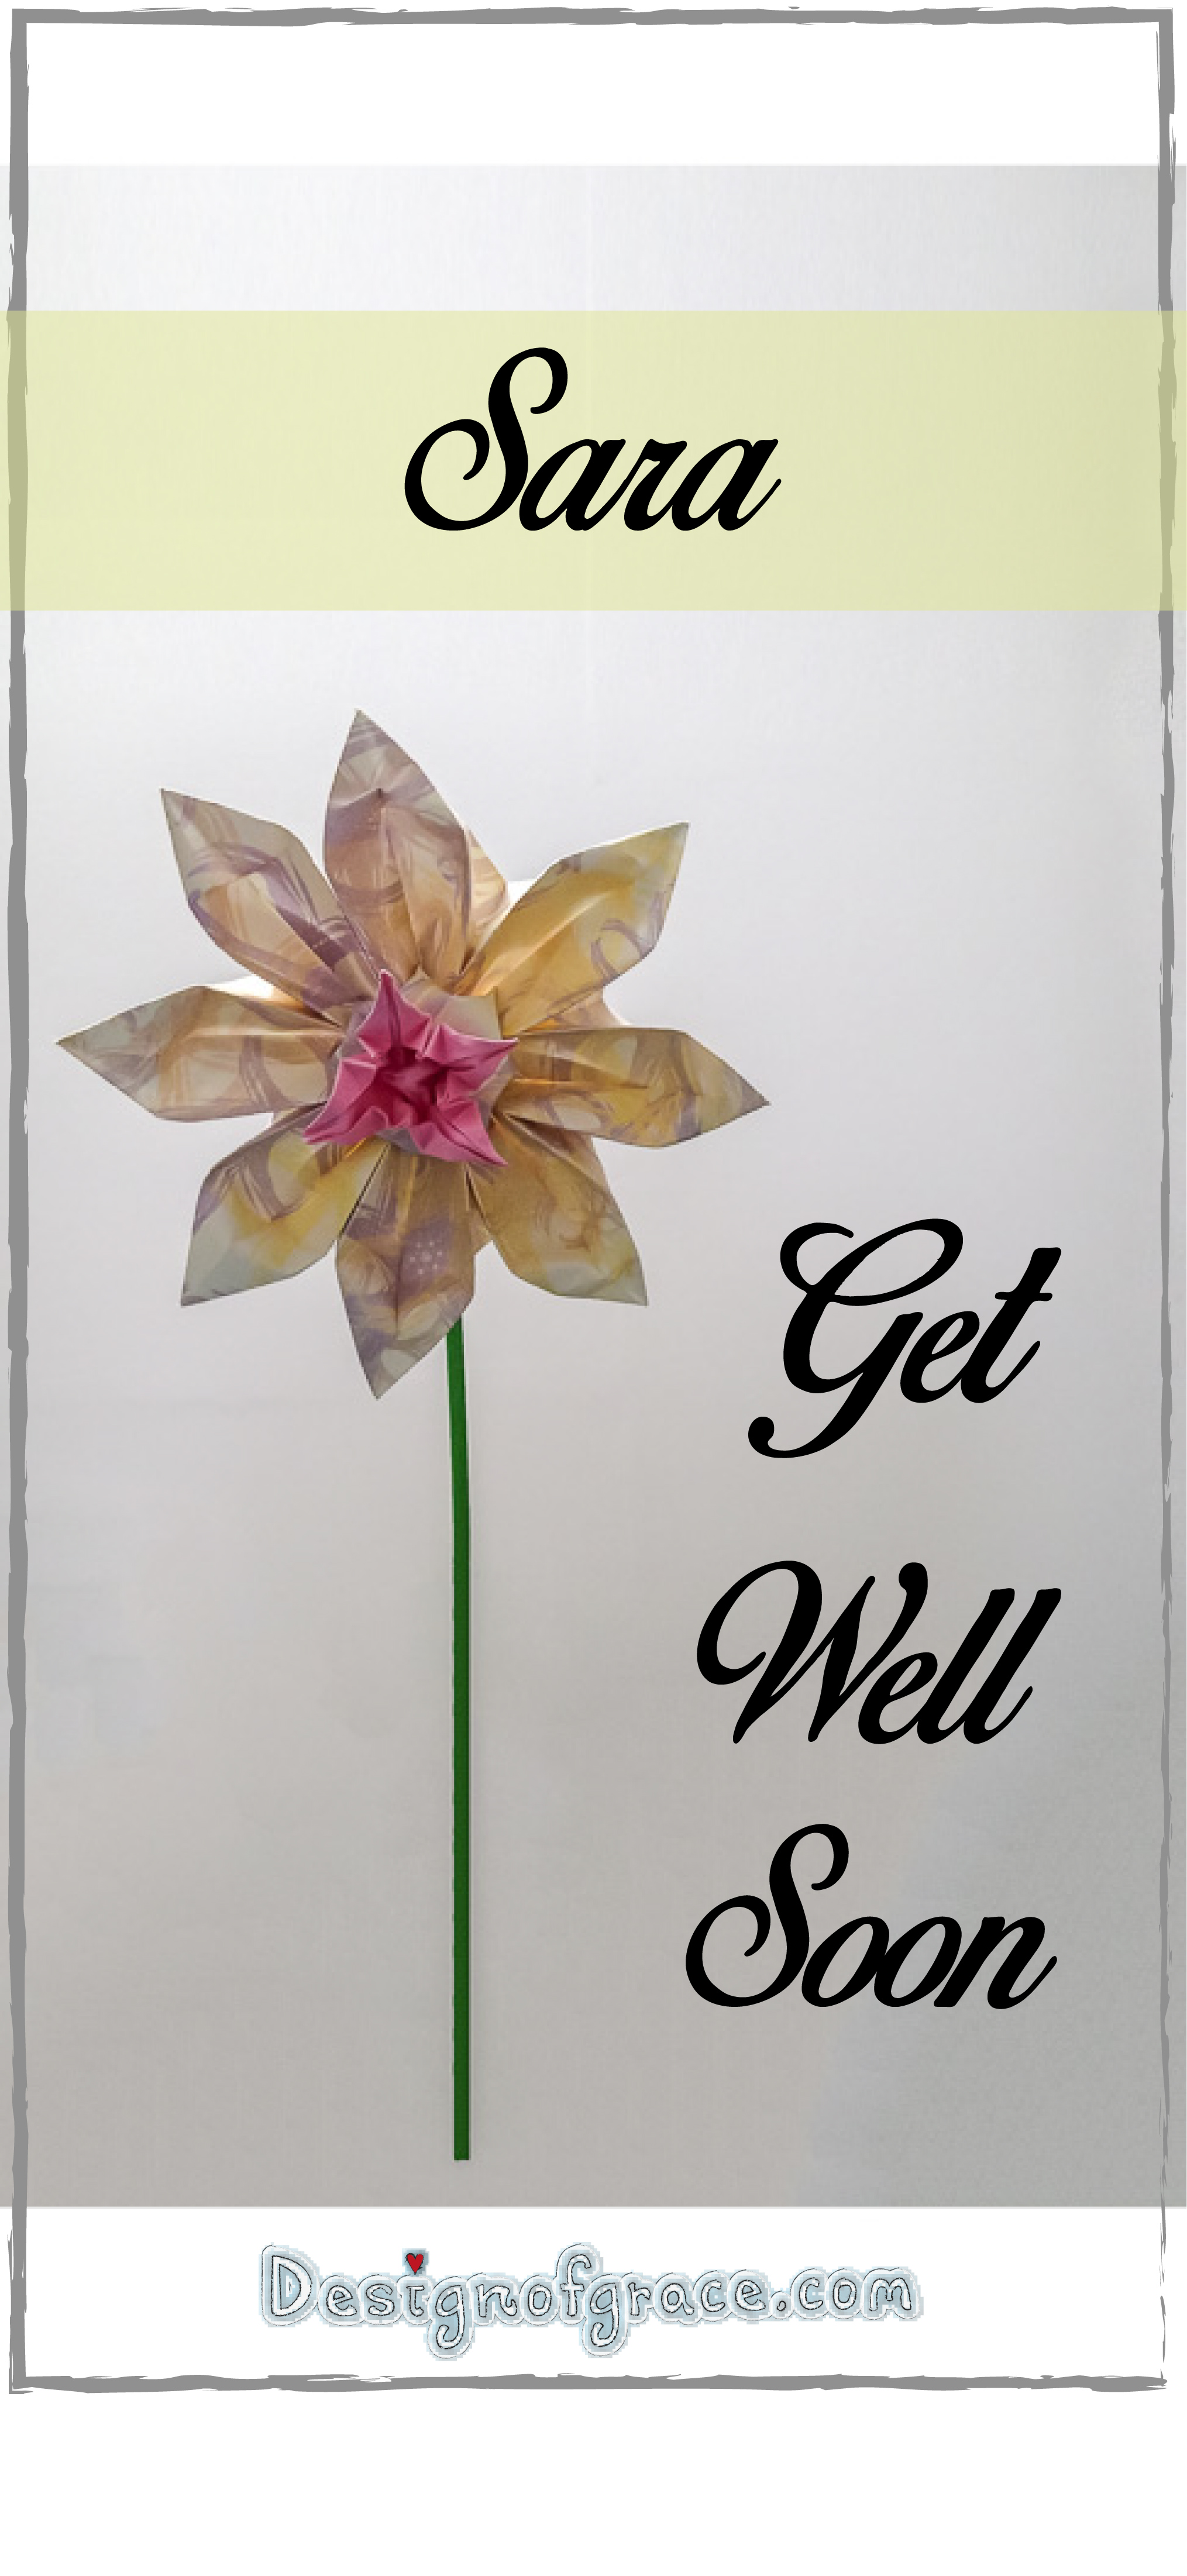 The name of the recipient on the top with an origami flower on the left with the words "Get Well Soon"